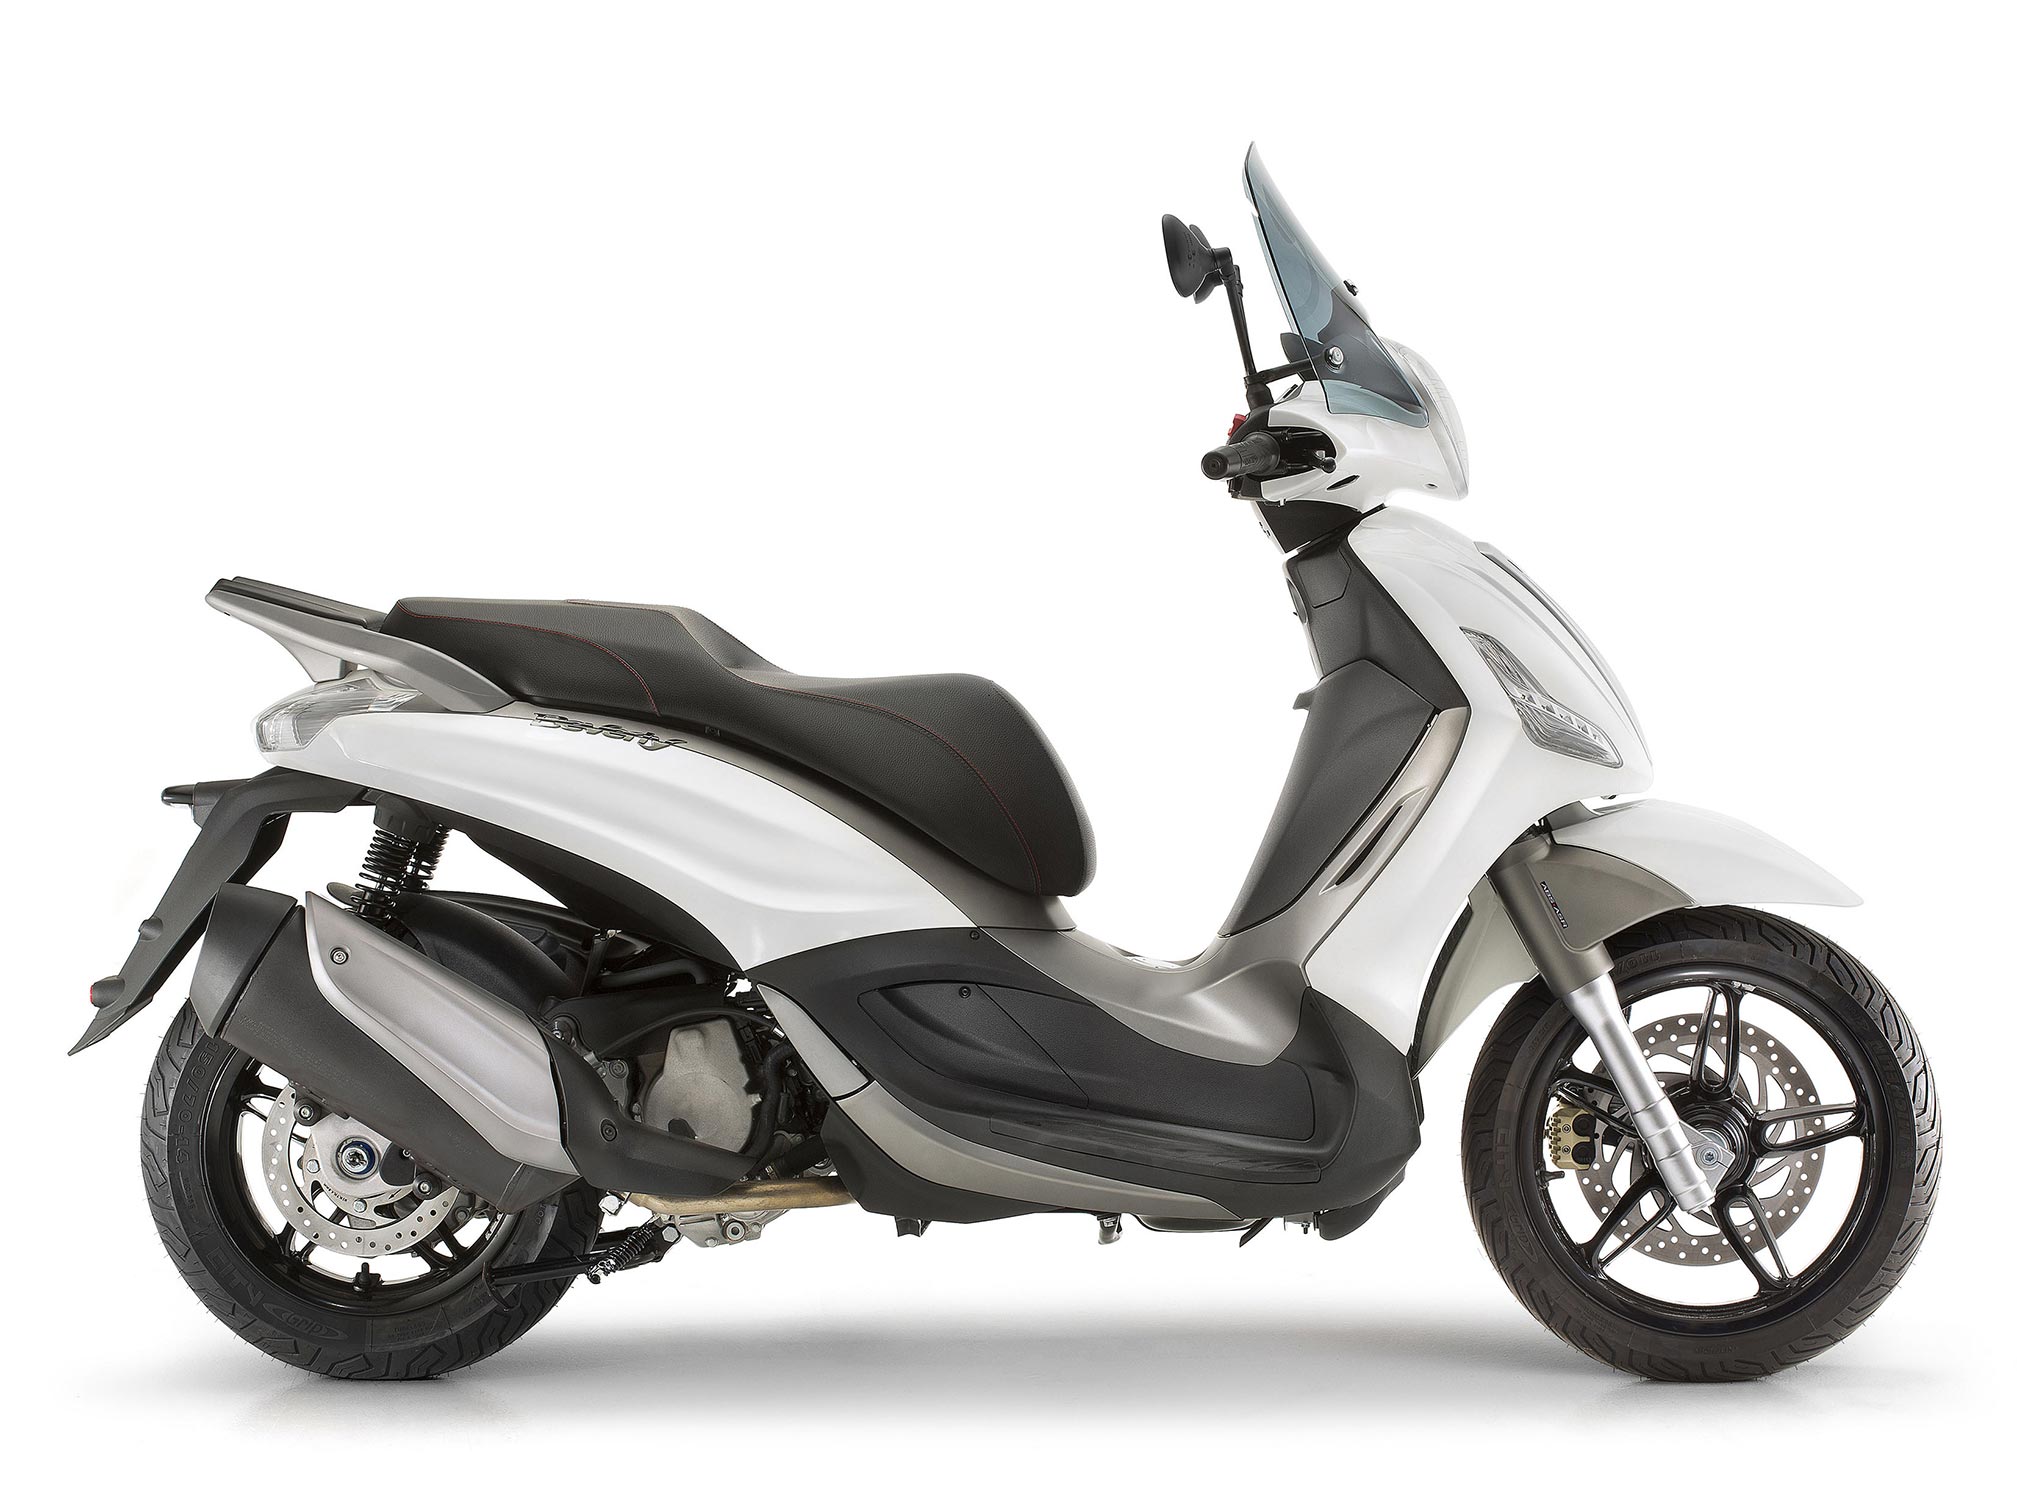 2017 Piaggio Beverly 350 SportTouring Review